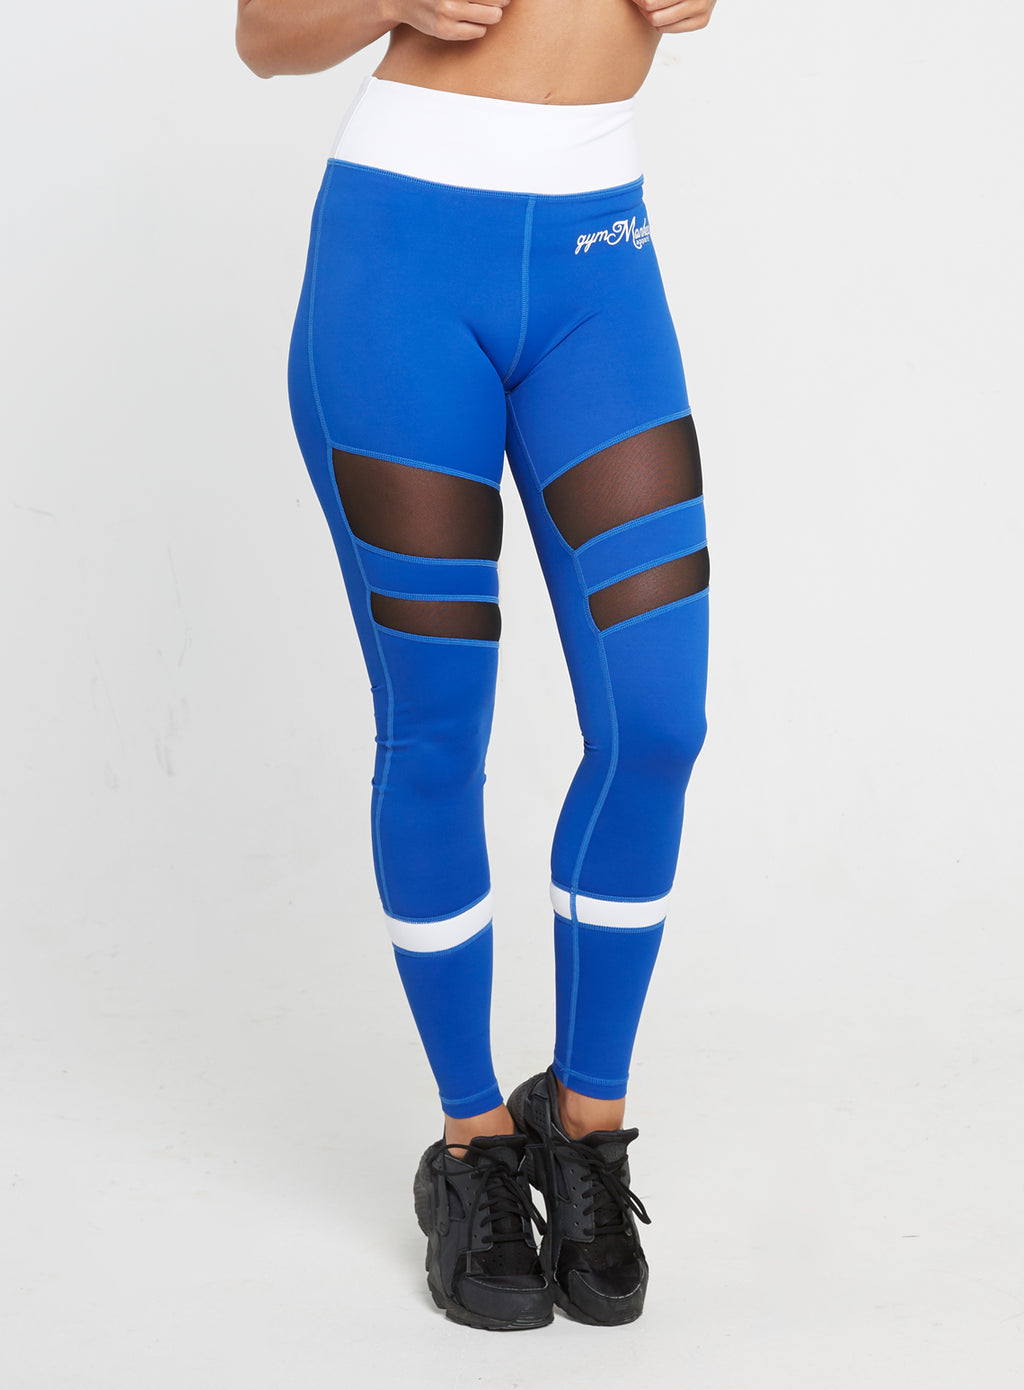 Gym Monkee - Ladies Blue and White Leggings FRONT AGAIN